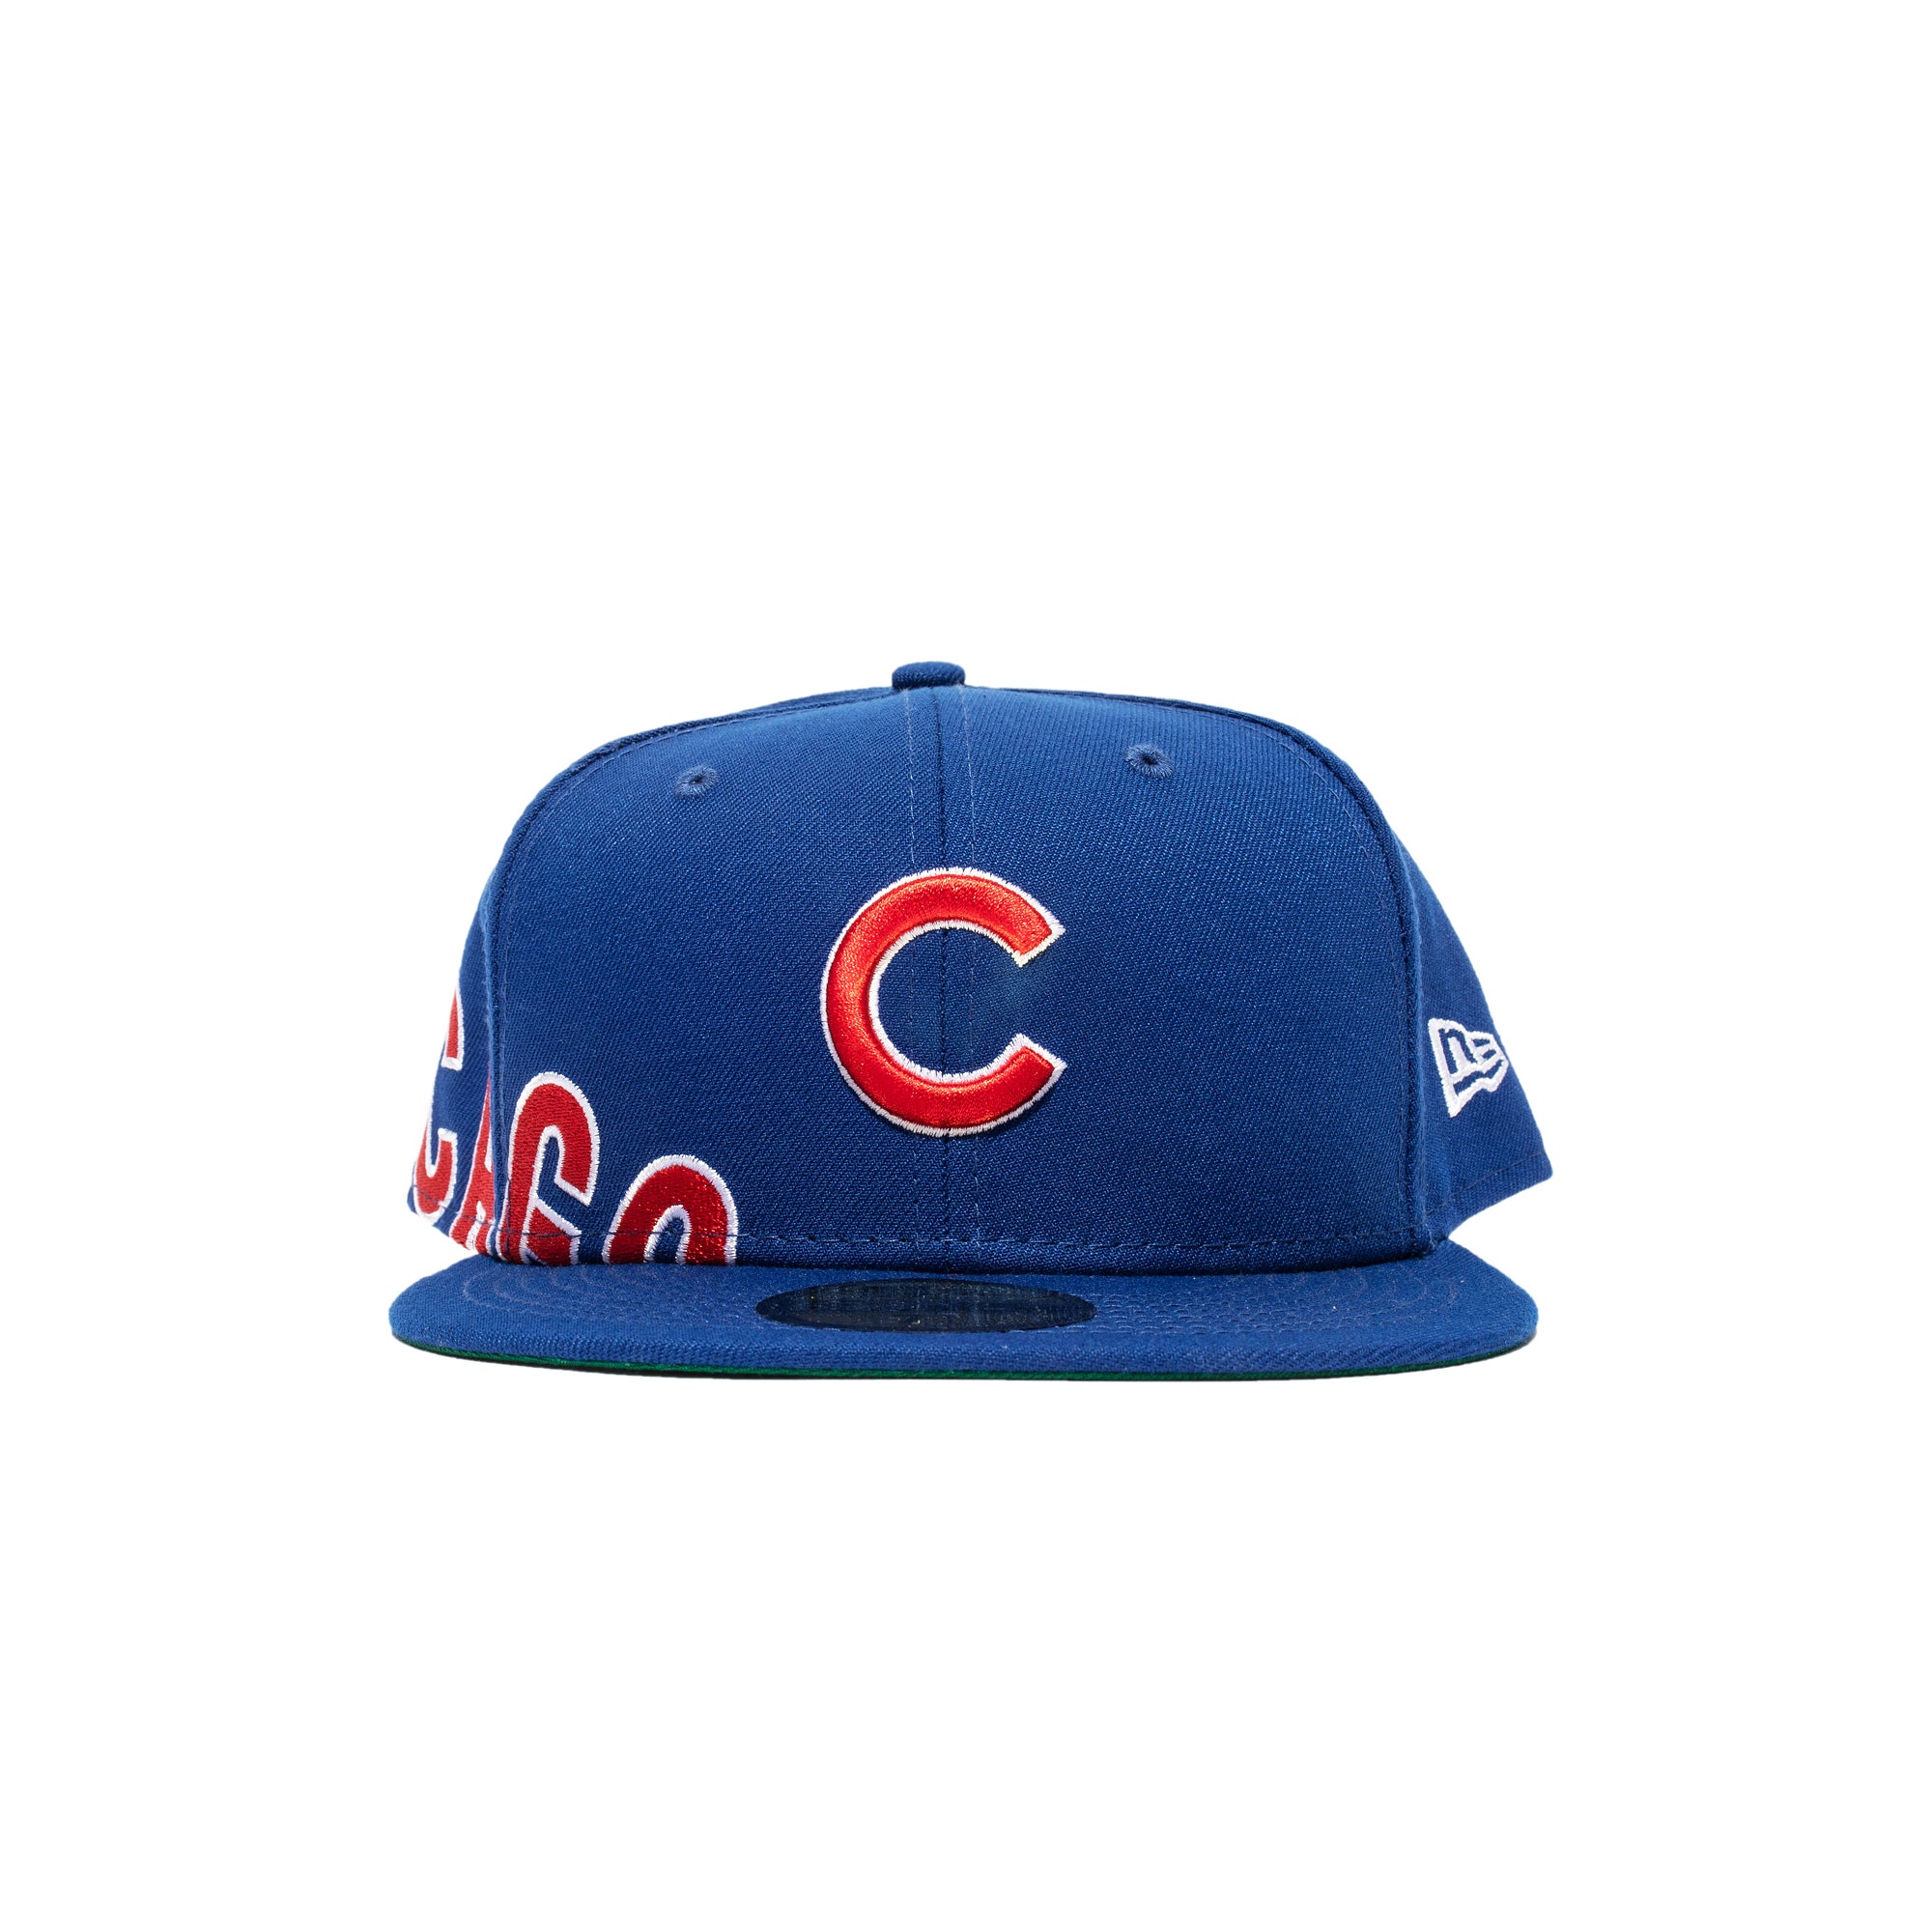 New Era Men's White Chicago Cubs Golfer Tee 9FIFTY Snapback Hat